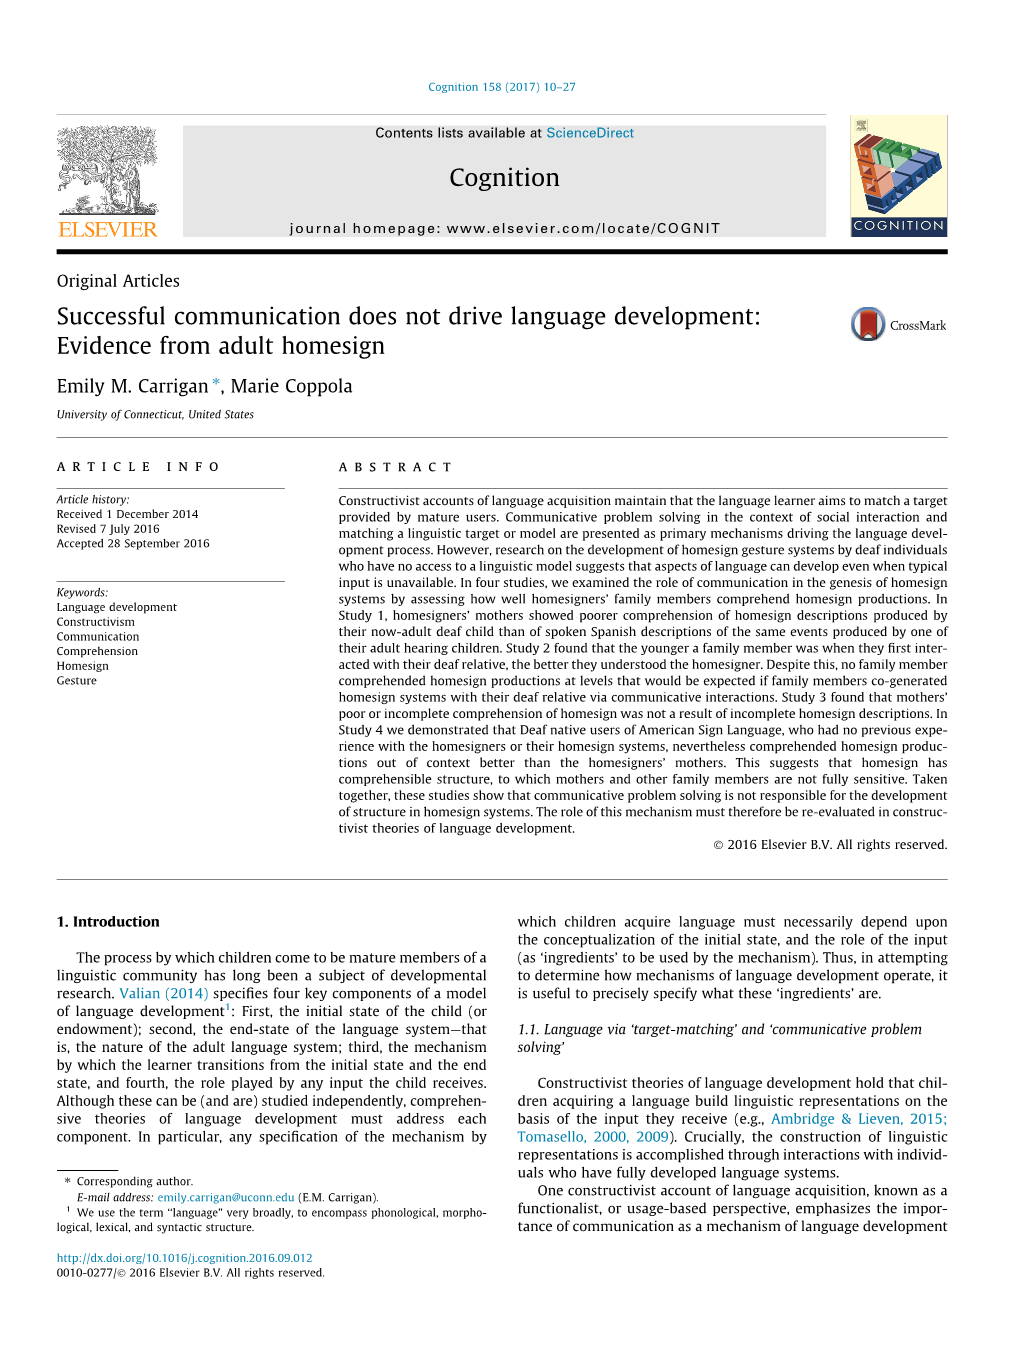 Successful Communication Does Not Drive Language Development: Evidence from Adult Homesign ⇑ Emily M